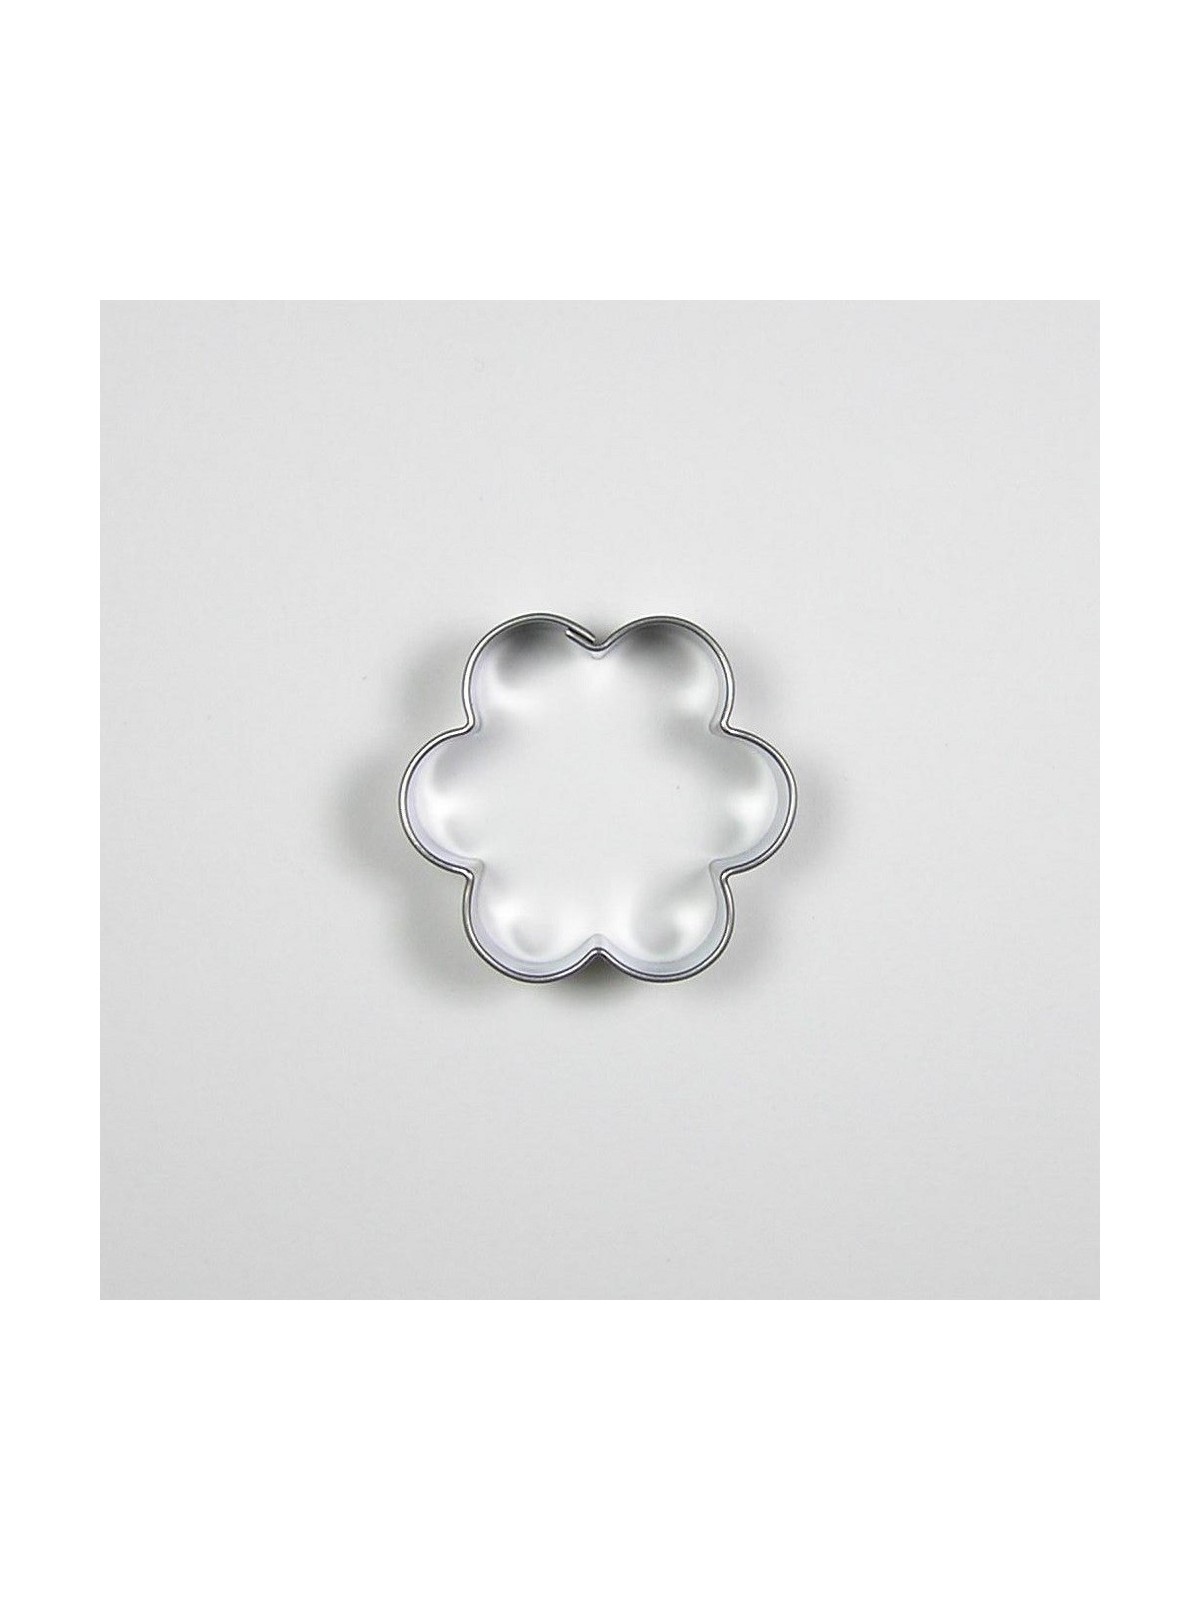 Stainless steel cutter - small flower